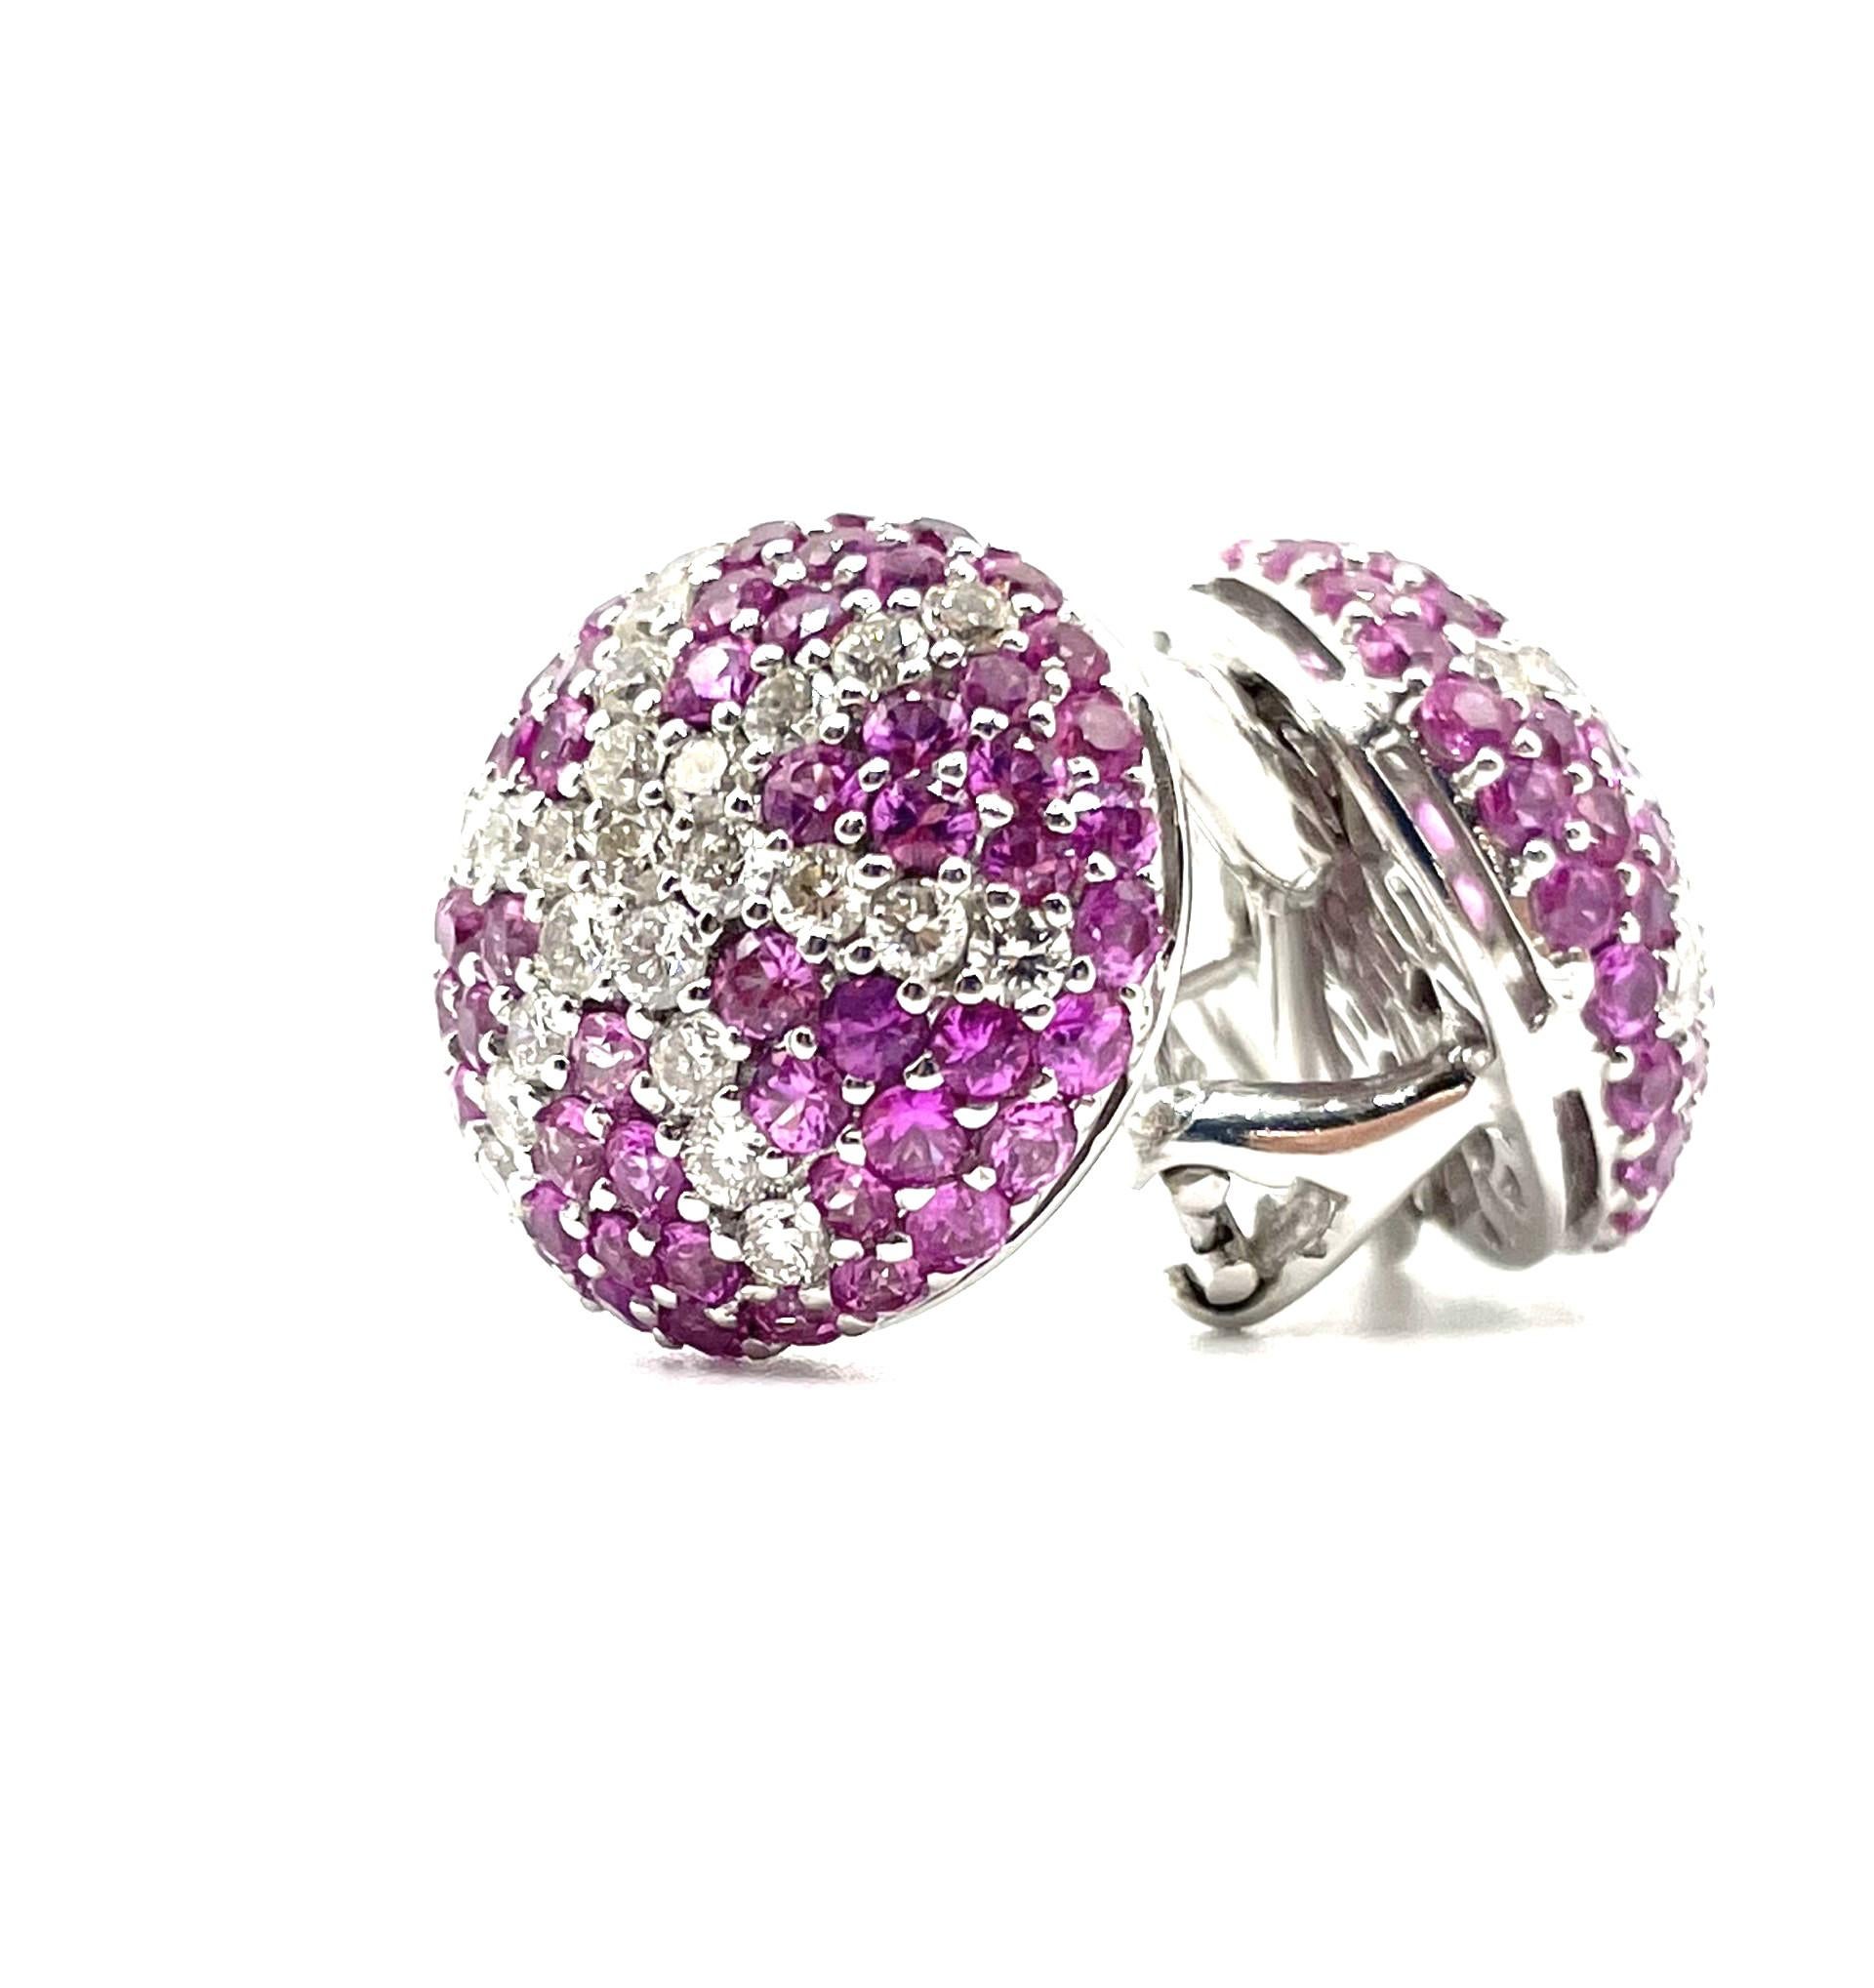 A pair of 18kt white gold round starfish puff  earrings set with natural pink sapphires and white diamonds  with a staright  post and omega clip system.

120 natural pink sapphires 4.85ct total weighty

50 brilliant cut diamonds 1.60 ct total